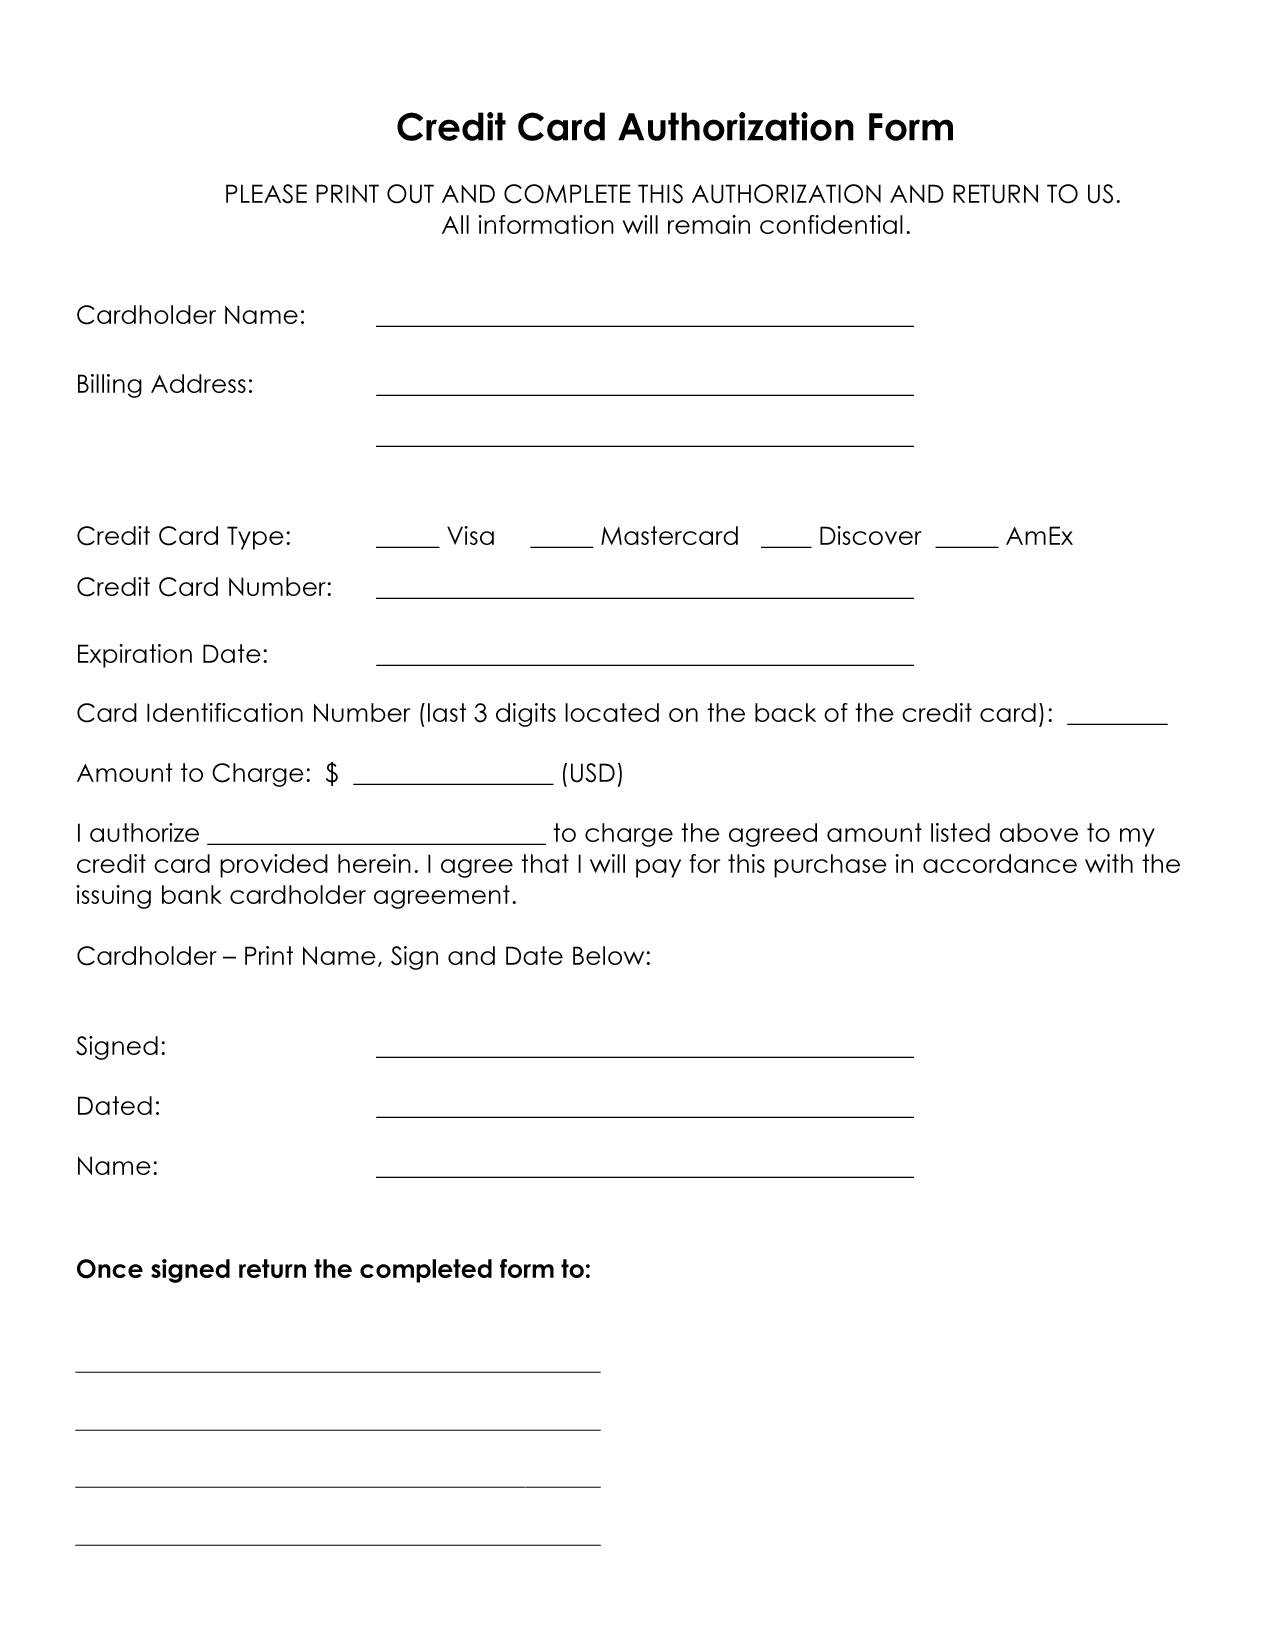 Credit Card Authorization Form Template Pdf – Colona.rsd7 Regarding Hotel Credit Card Authorization Form Template